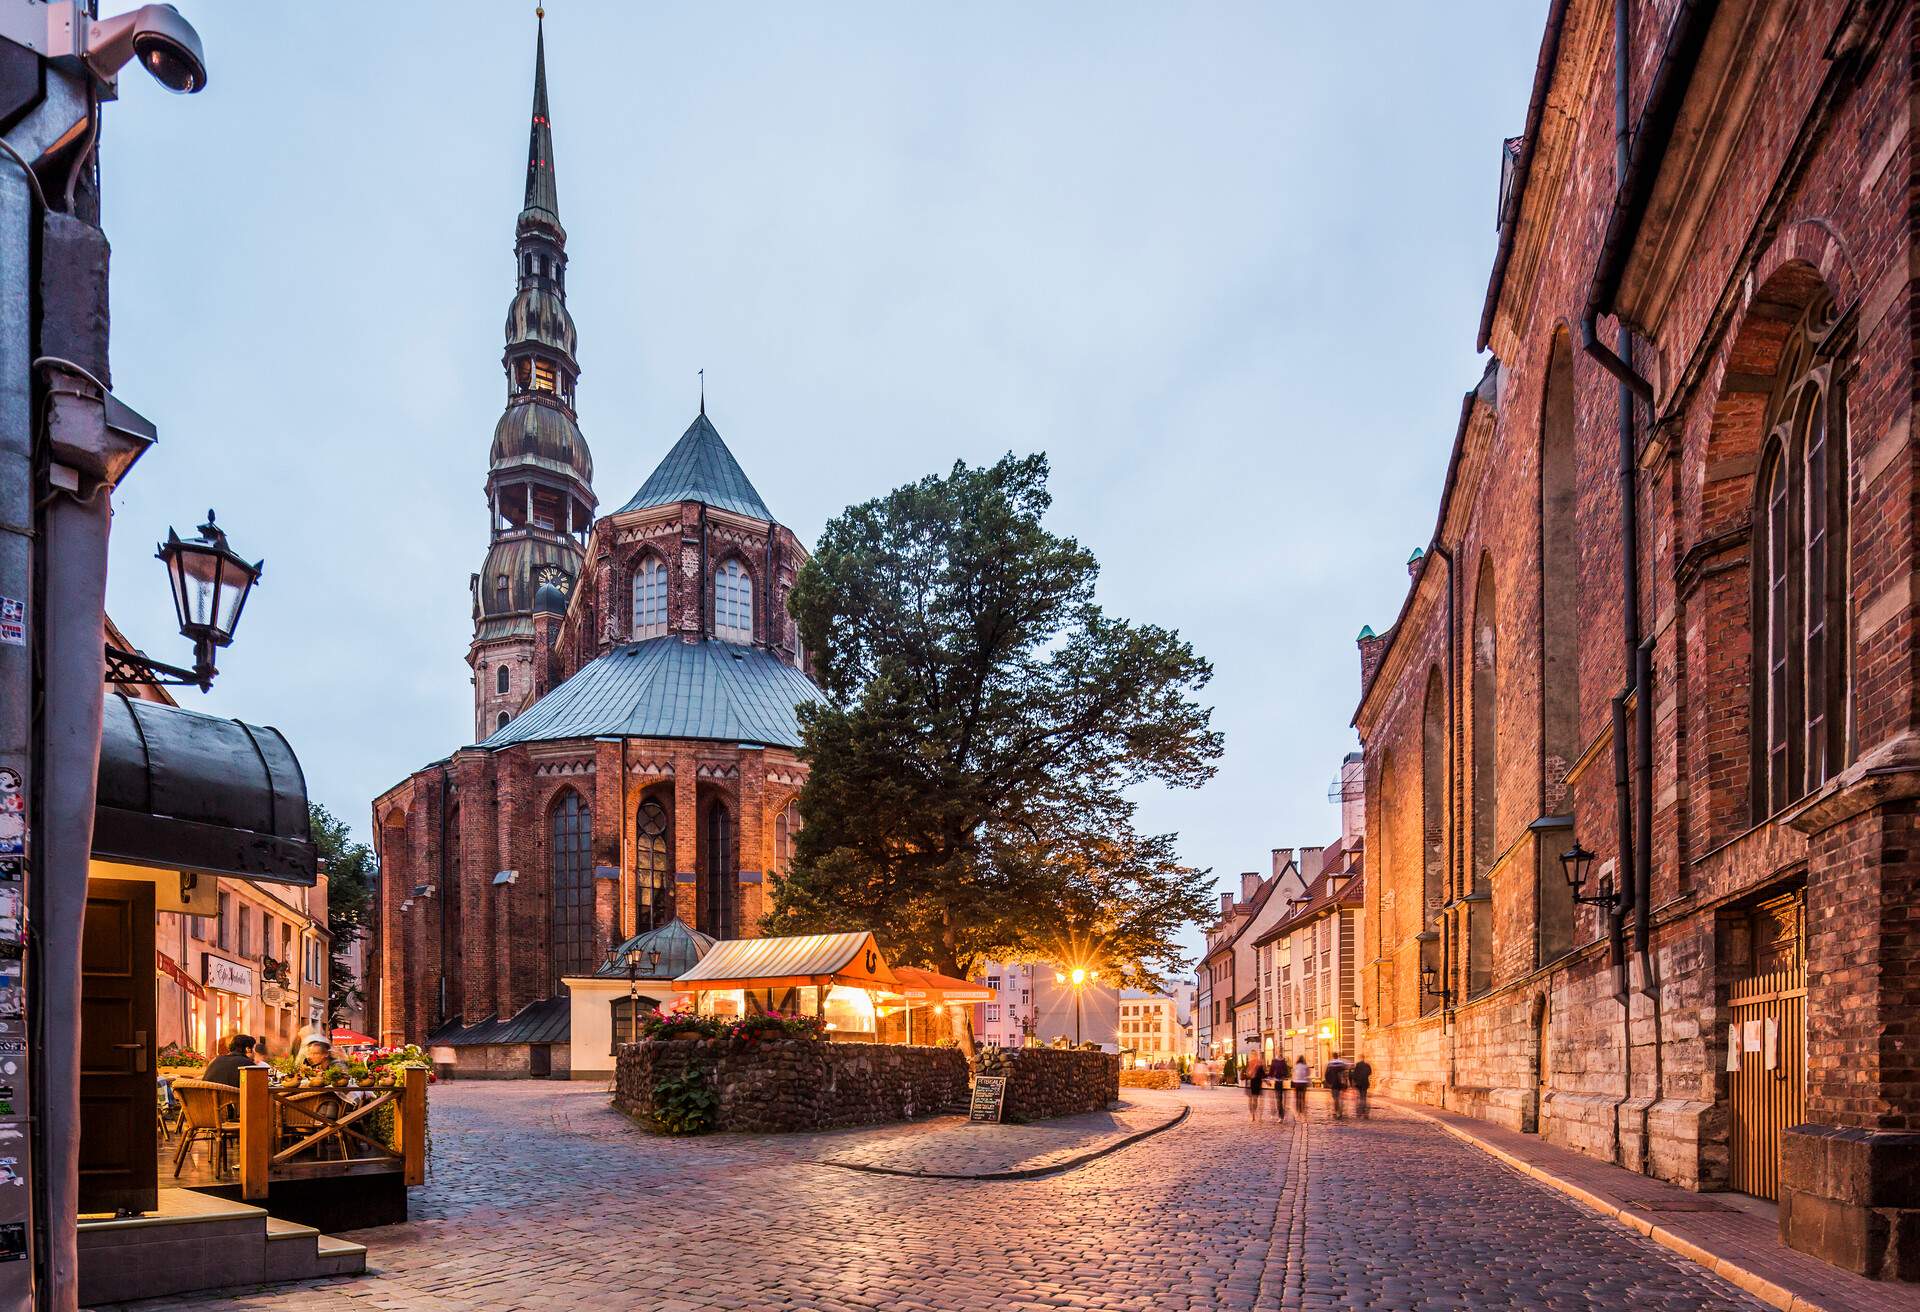 DEST_LATVIA_RIGA_ST-PETERS-CHURCH_GettyImages-694625309